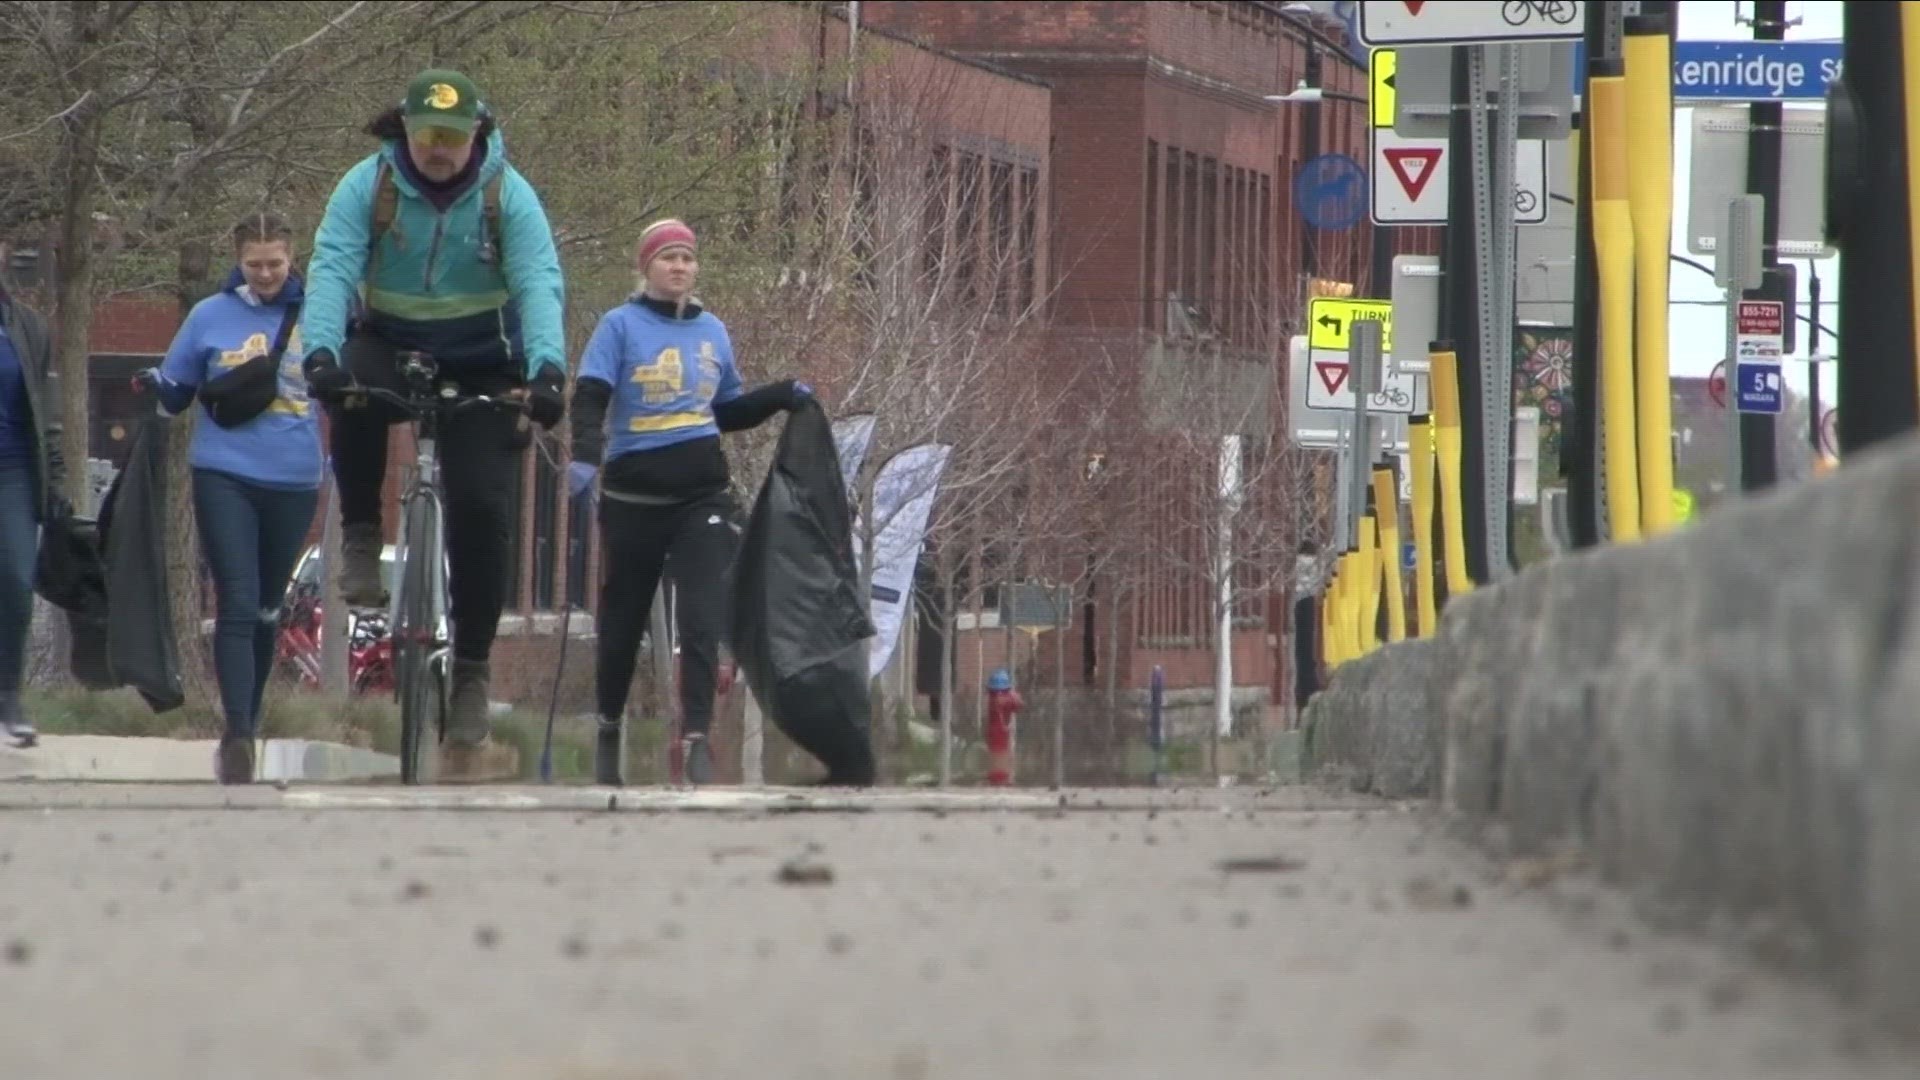 Cyclists picked up trash and debris along the Niagara Street bike trail. Volunteers said the path is often littered with glass and debris.